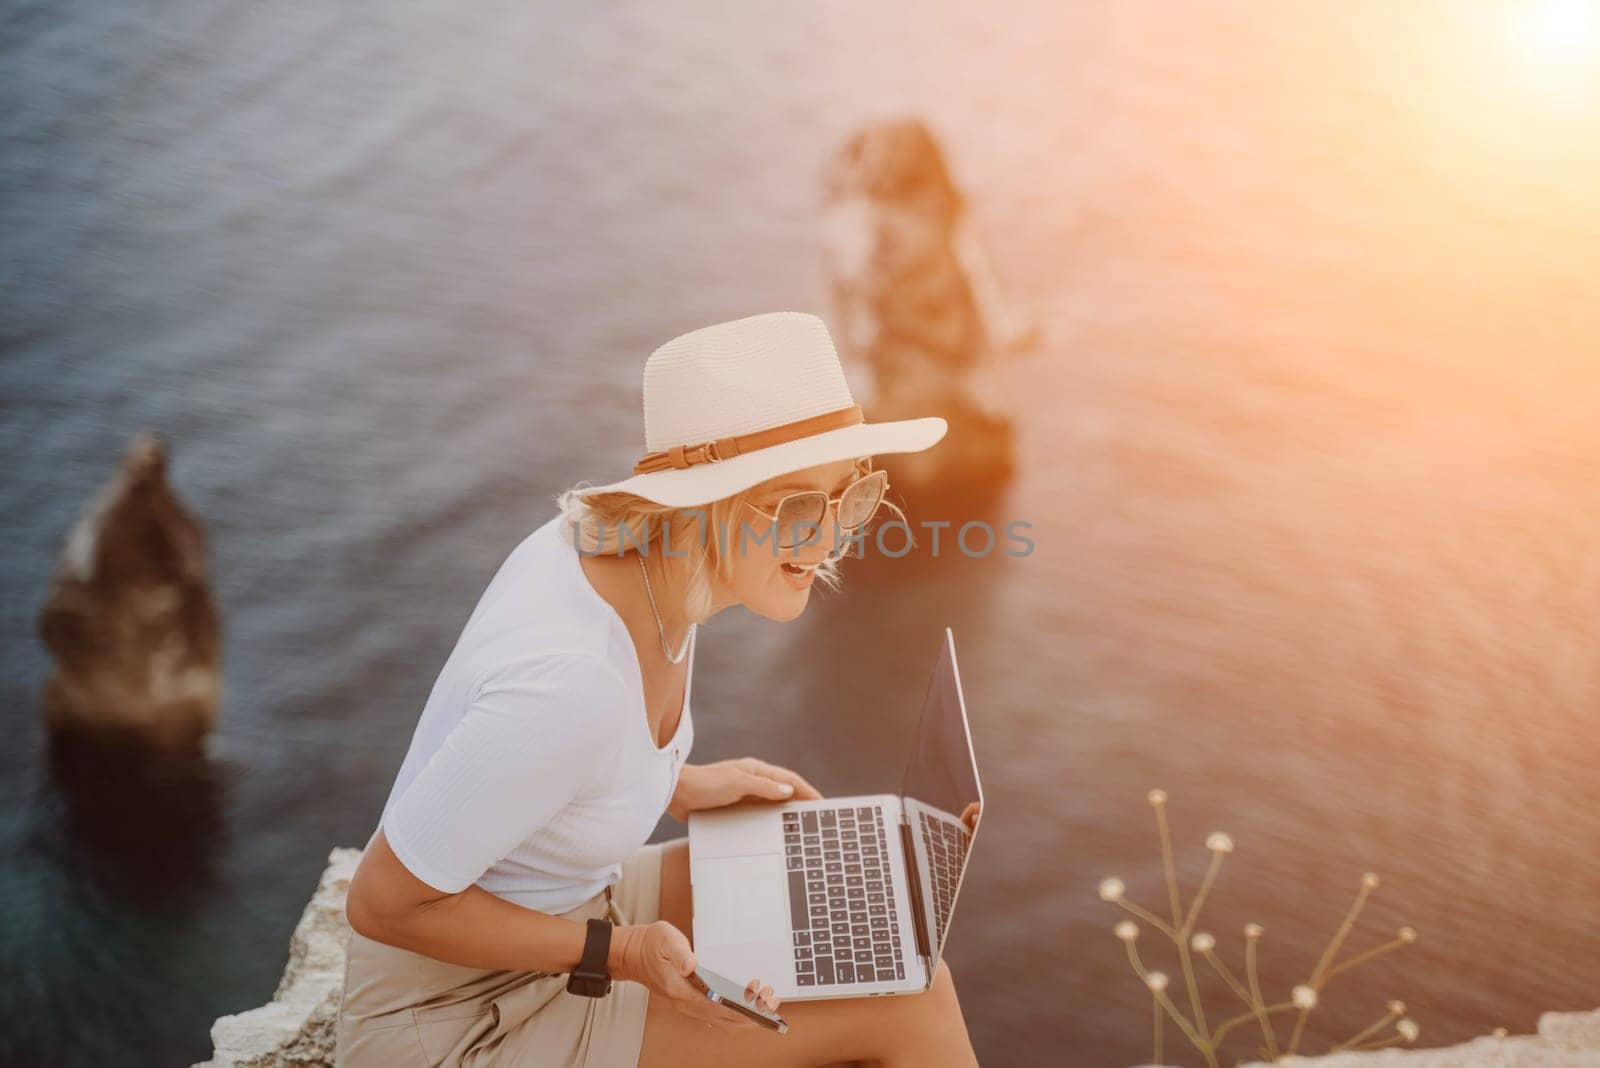 Freelance women sea working on the computer. Good looking middle aged woman typing on a laptop keyboard outdoors with a beautiful sea view. The concept of remote work